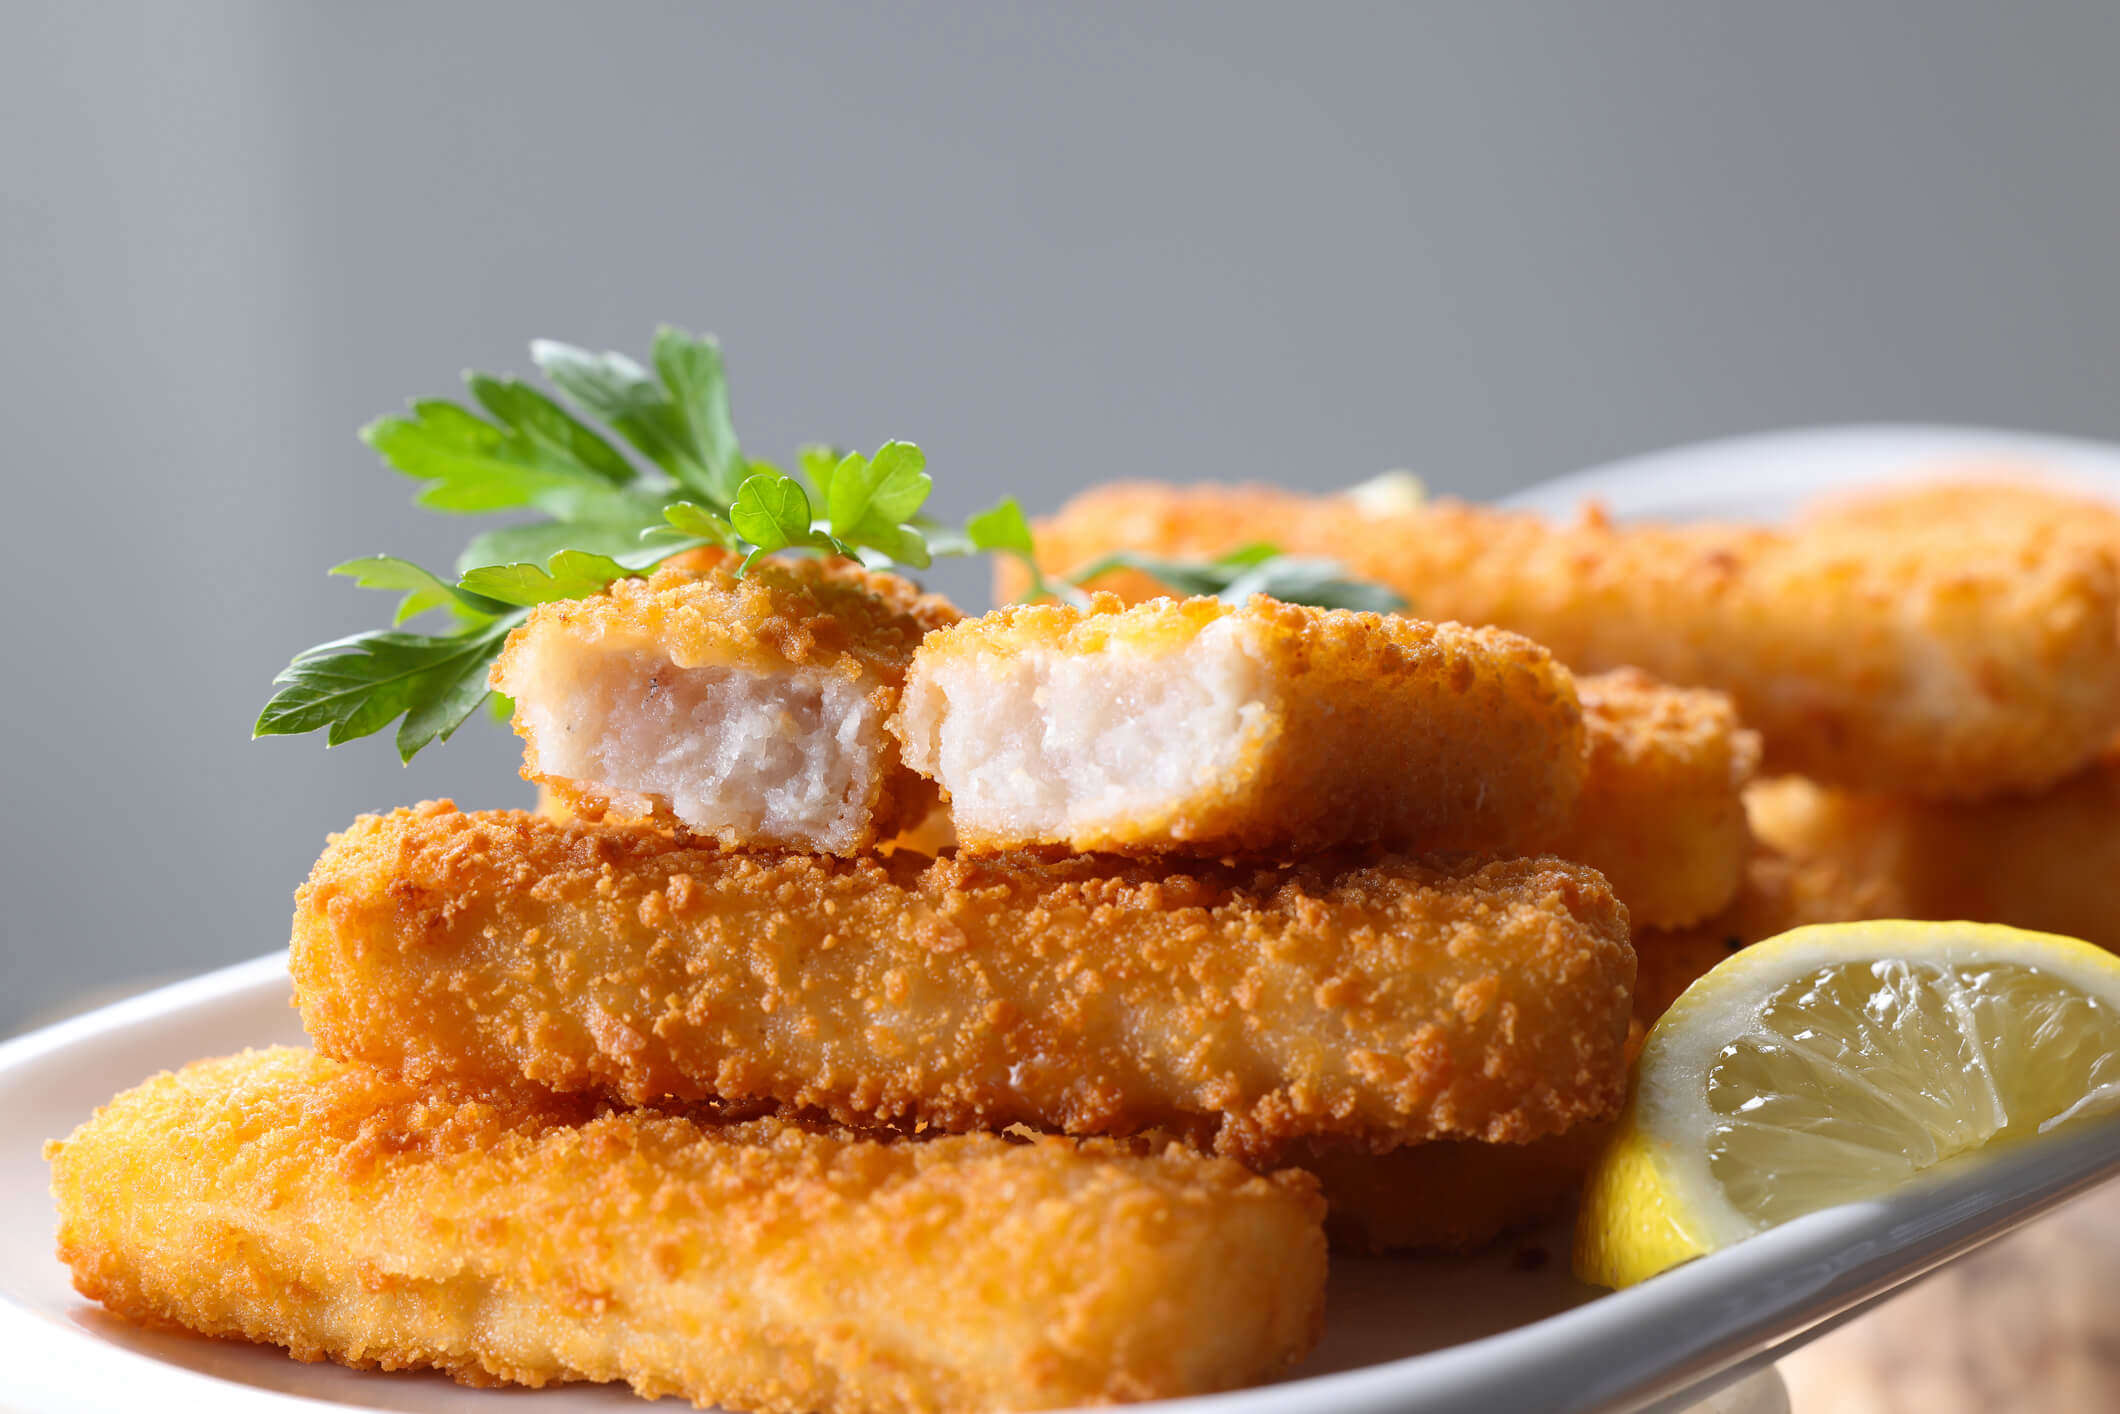 a close up of a pile of homemade fish fingers on a white plat with a slice of lemon and garnished with herbs